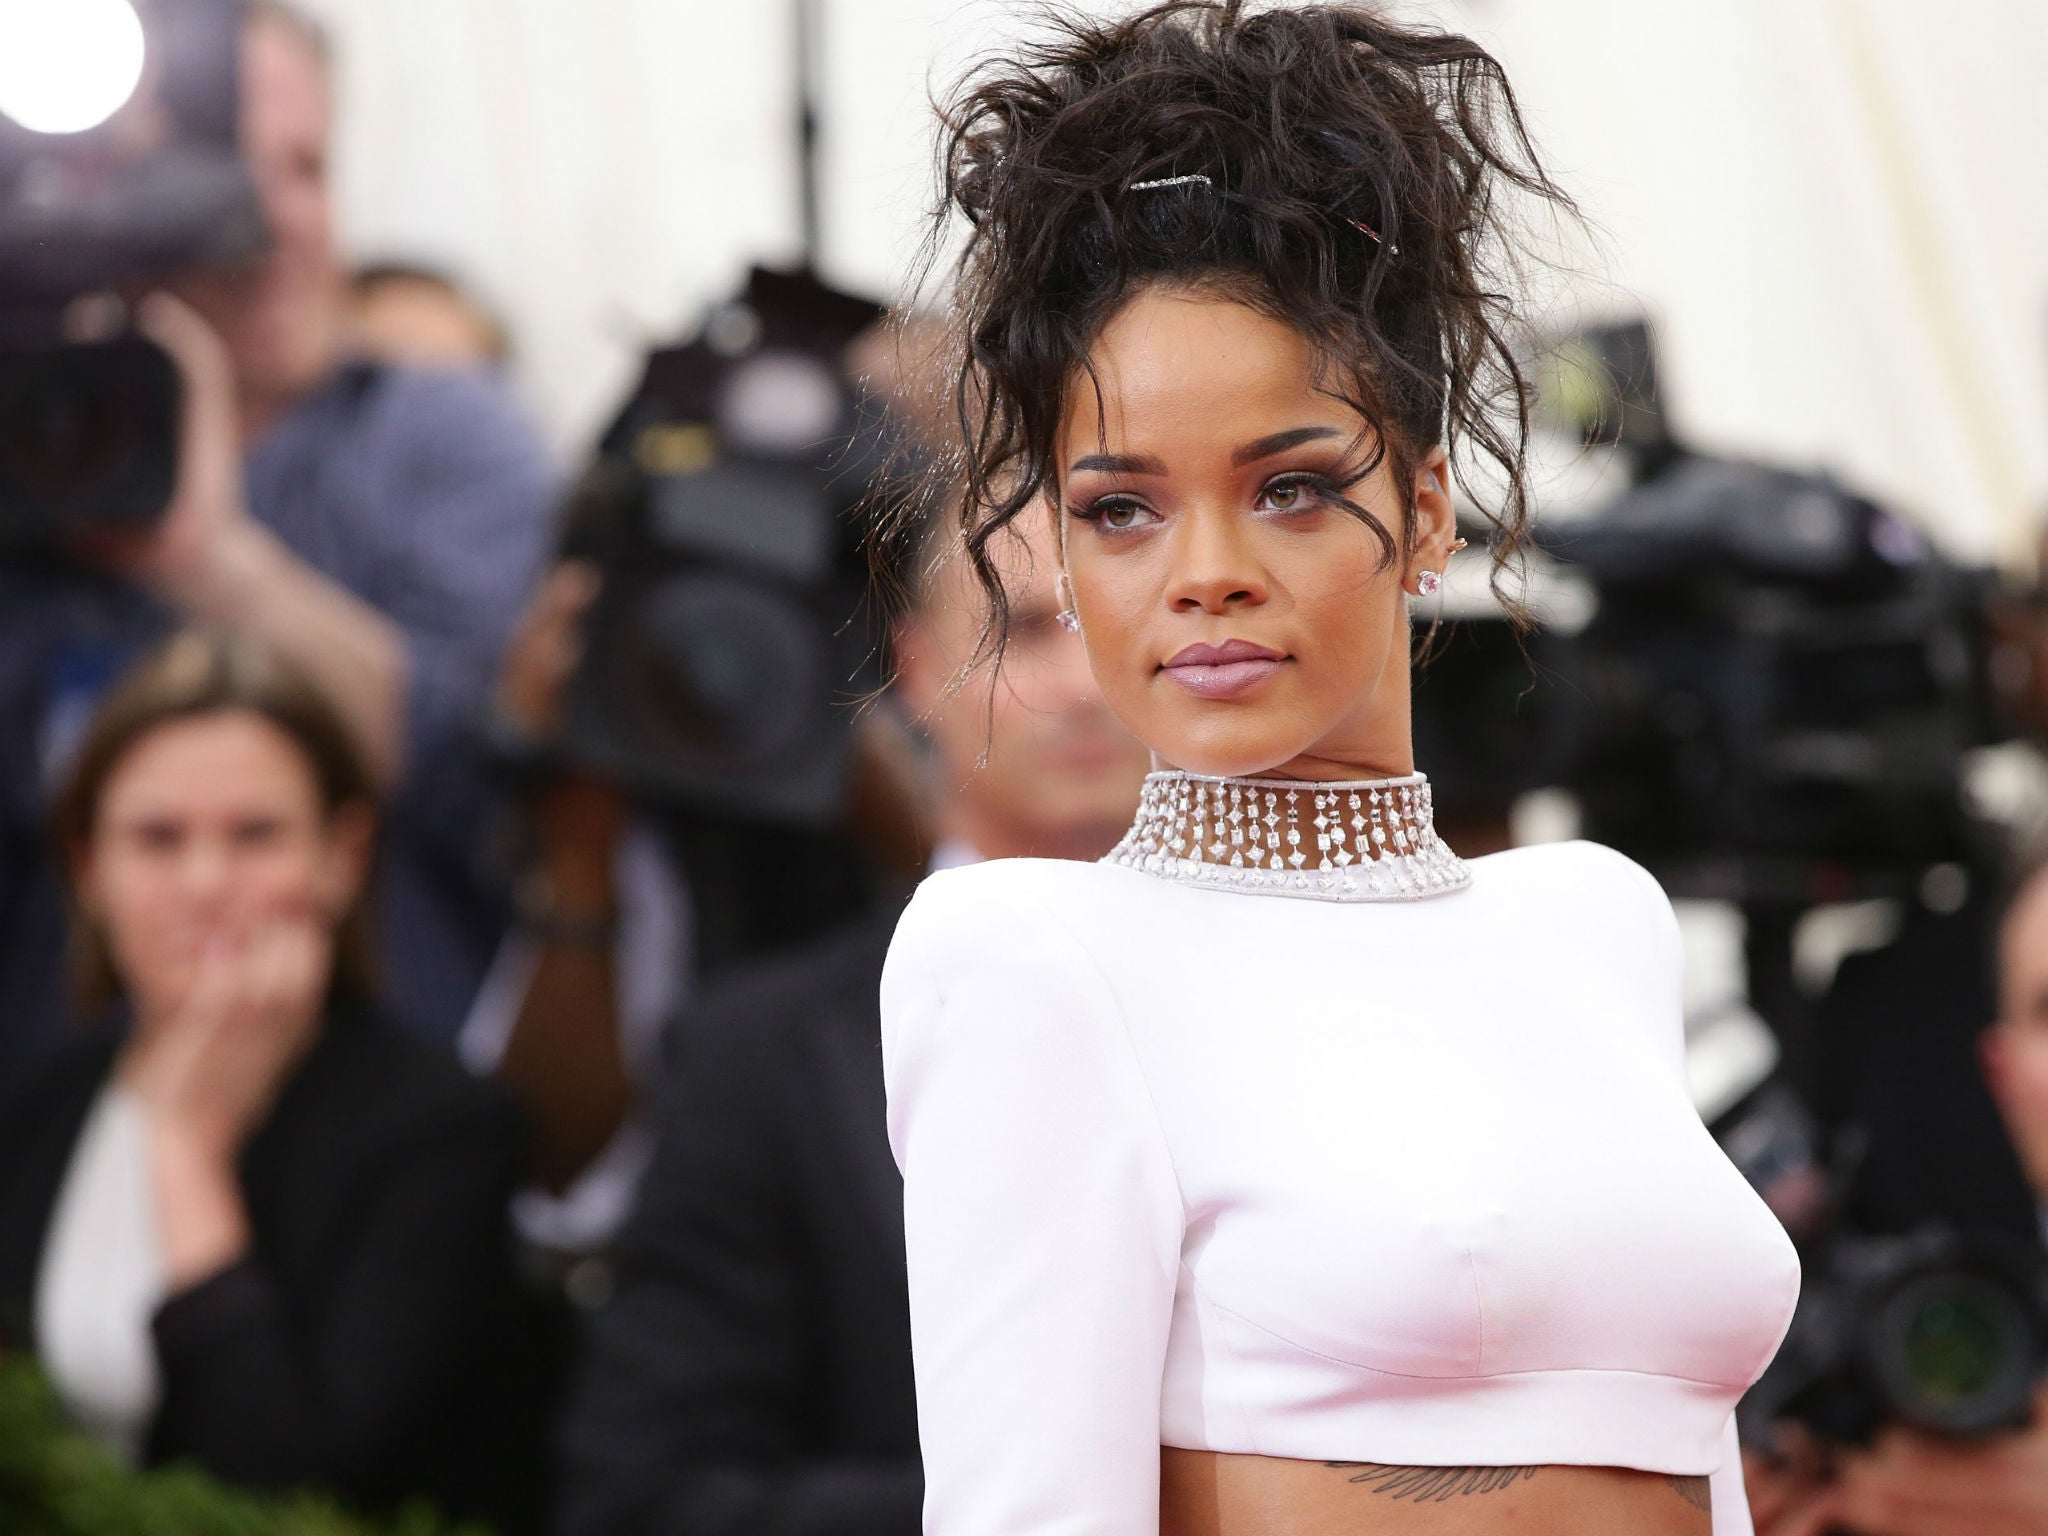 Rihanna took to her Instagram account to address the dating rumours